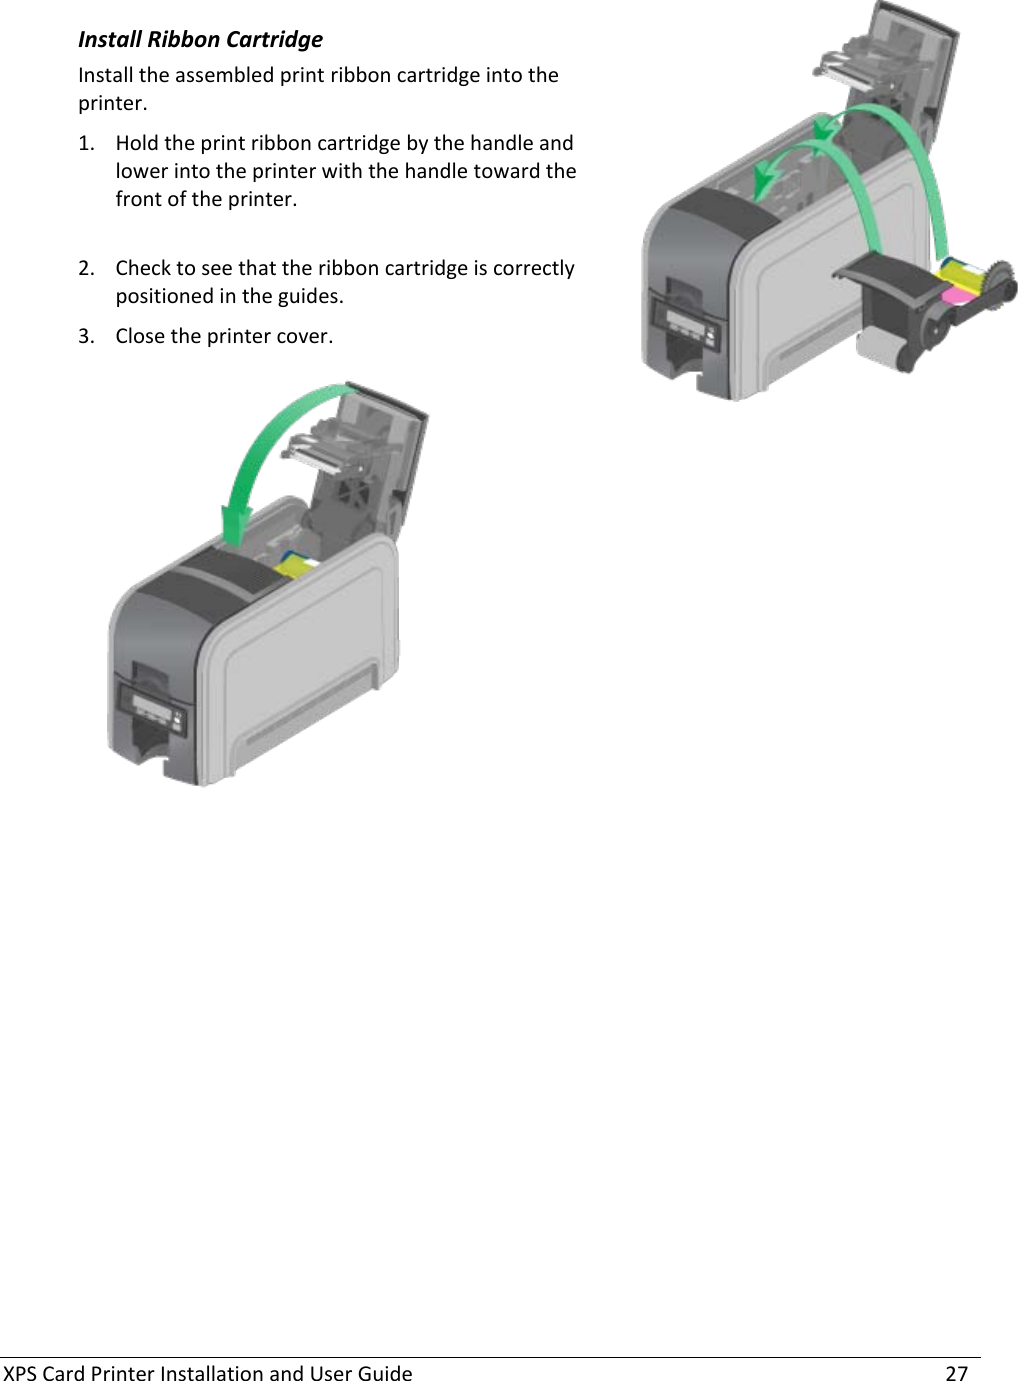 XPS Card Printer Installation and User Guide    27   Install Ribbon Cartridge Install the assembled print ribbon cartridge into the printer. 1. Hold the print ribbon cartridge by the handle and lower into the printer with the handle toward the front of the printer.   2. Check to see that the ribbon cartridge is correctly positioned in the guides.  3. Close the printer cover.   